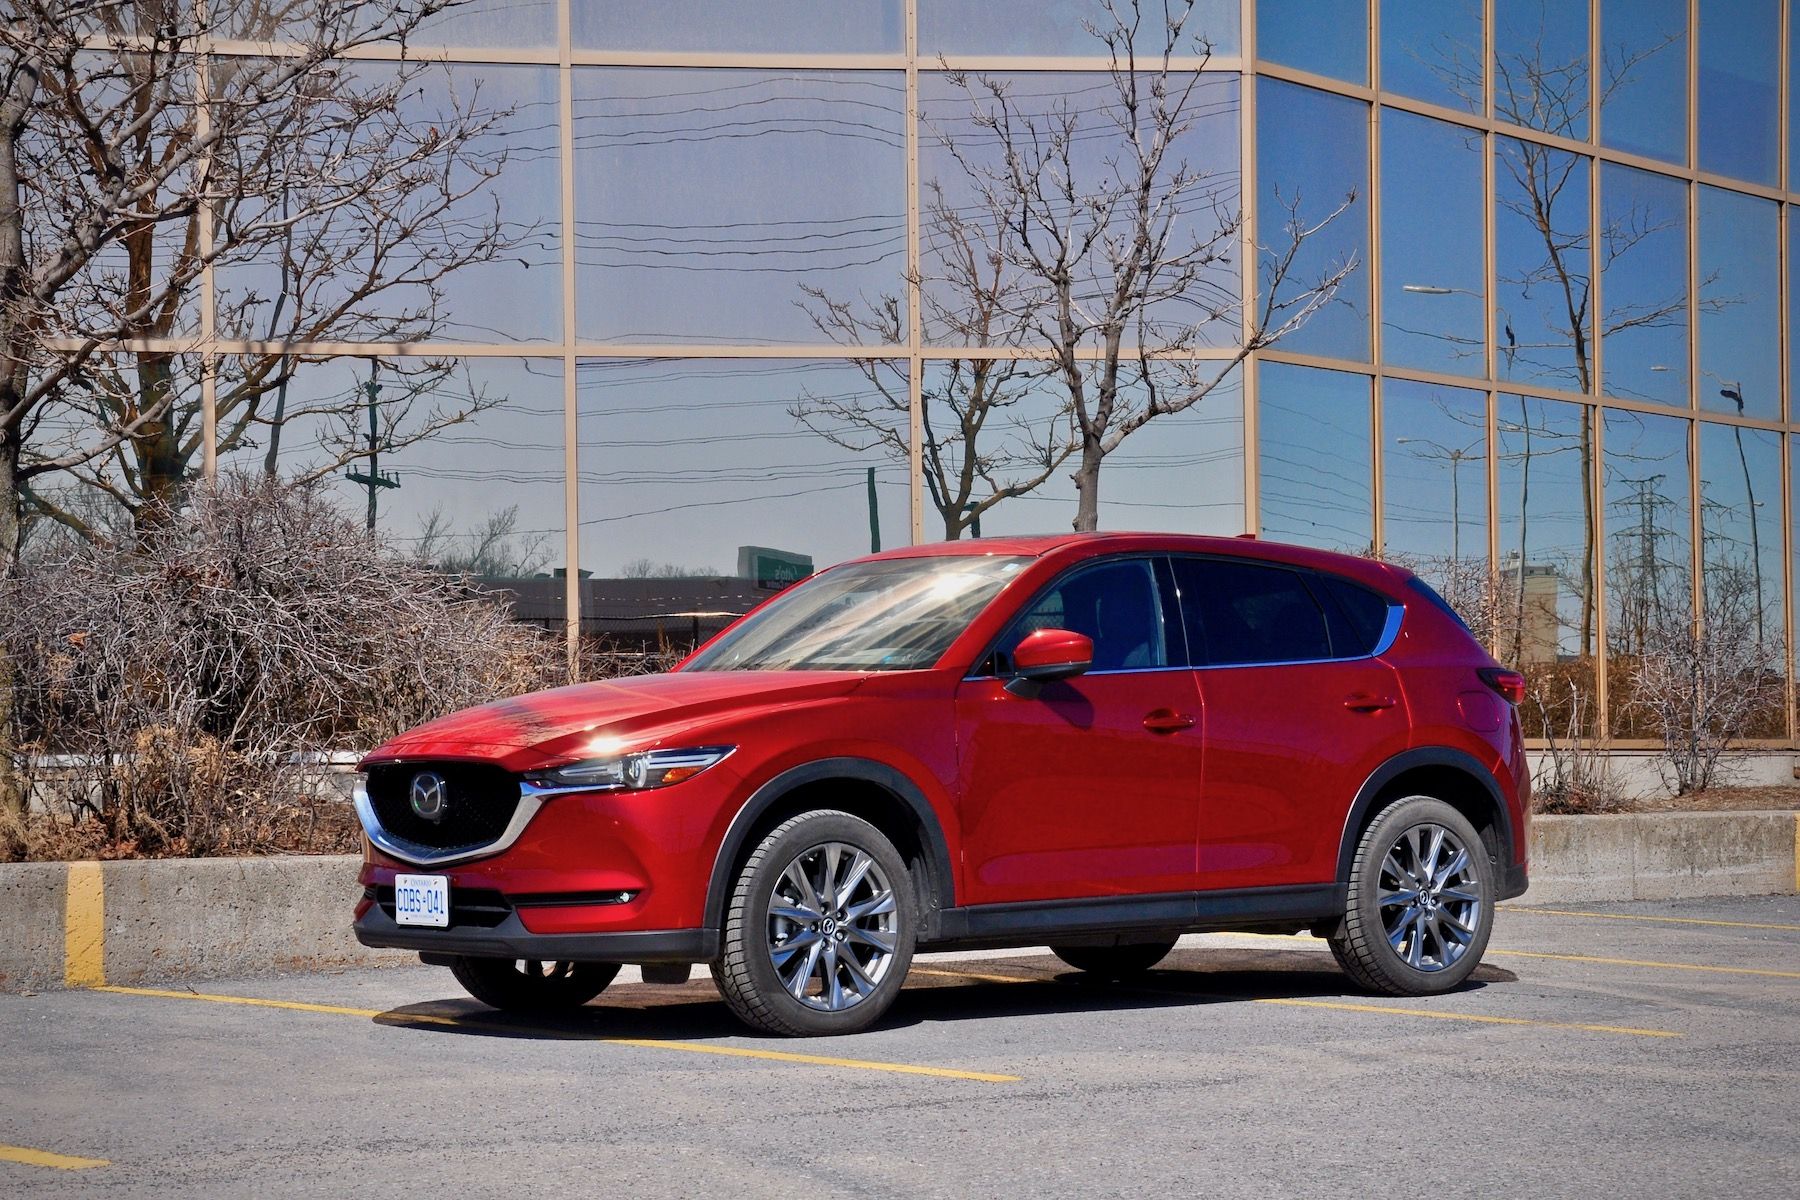 2019 Mazda CX-5: 10 Things We Like (and 4 Not So Much)